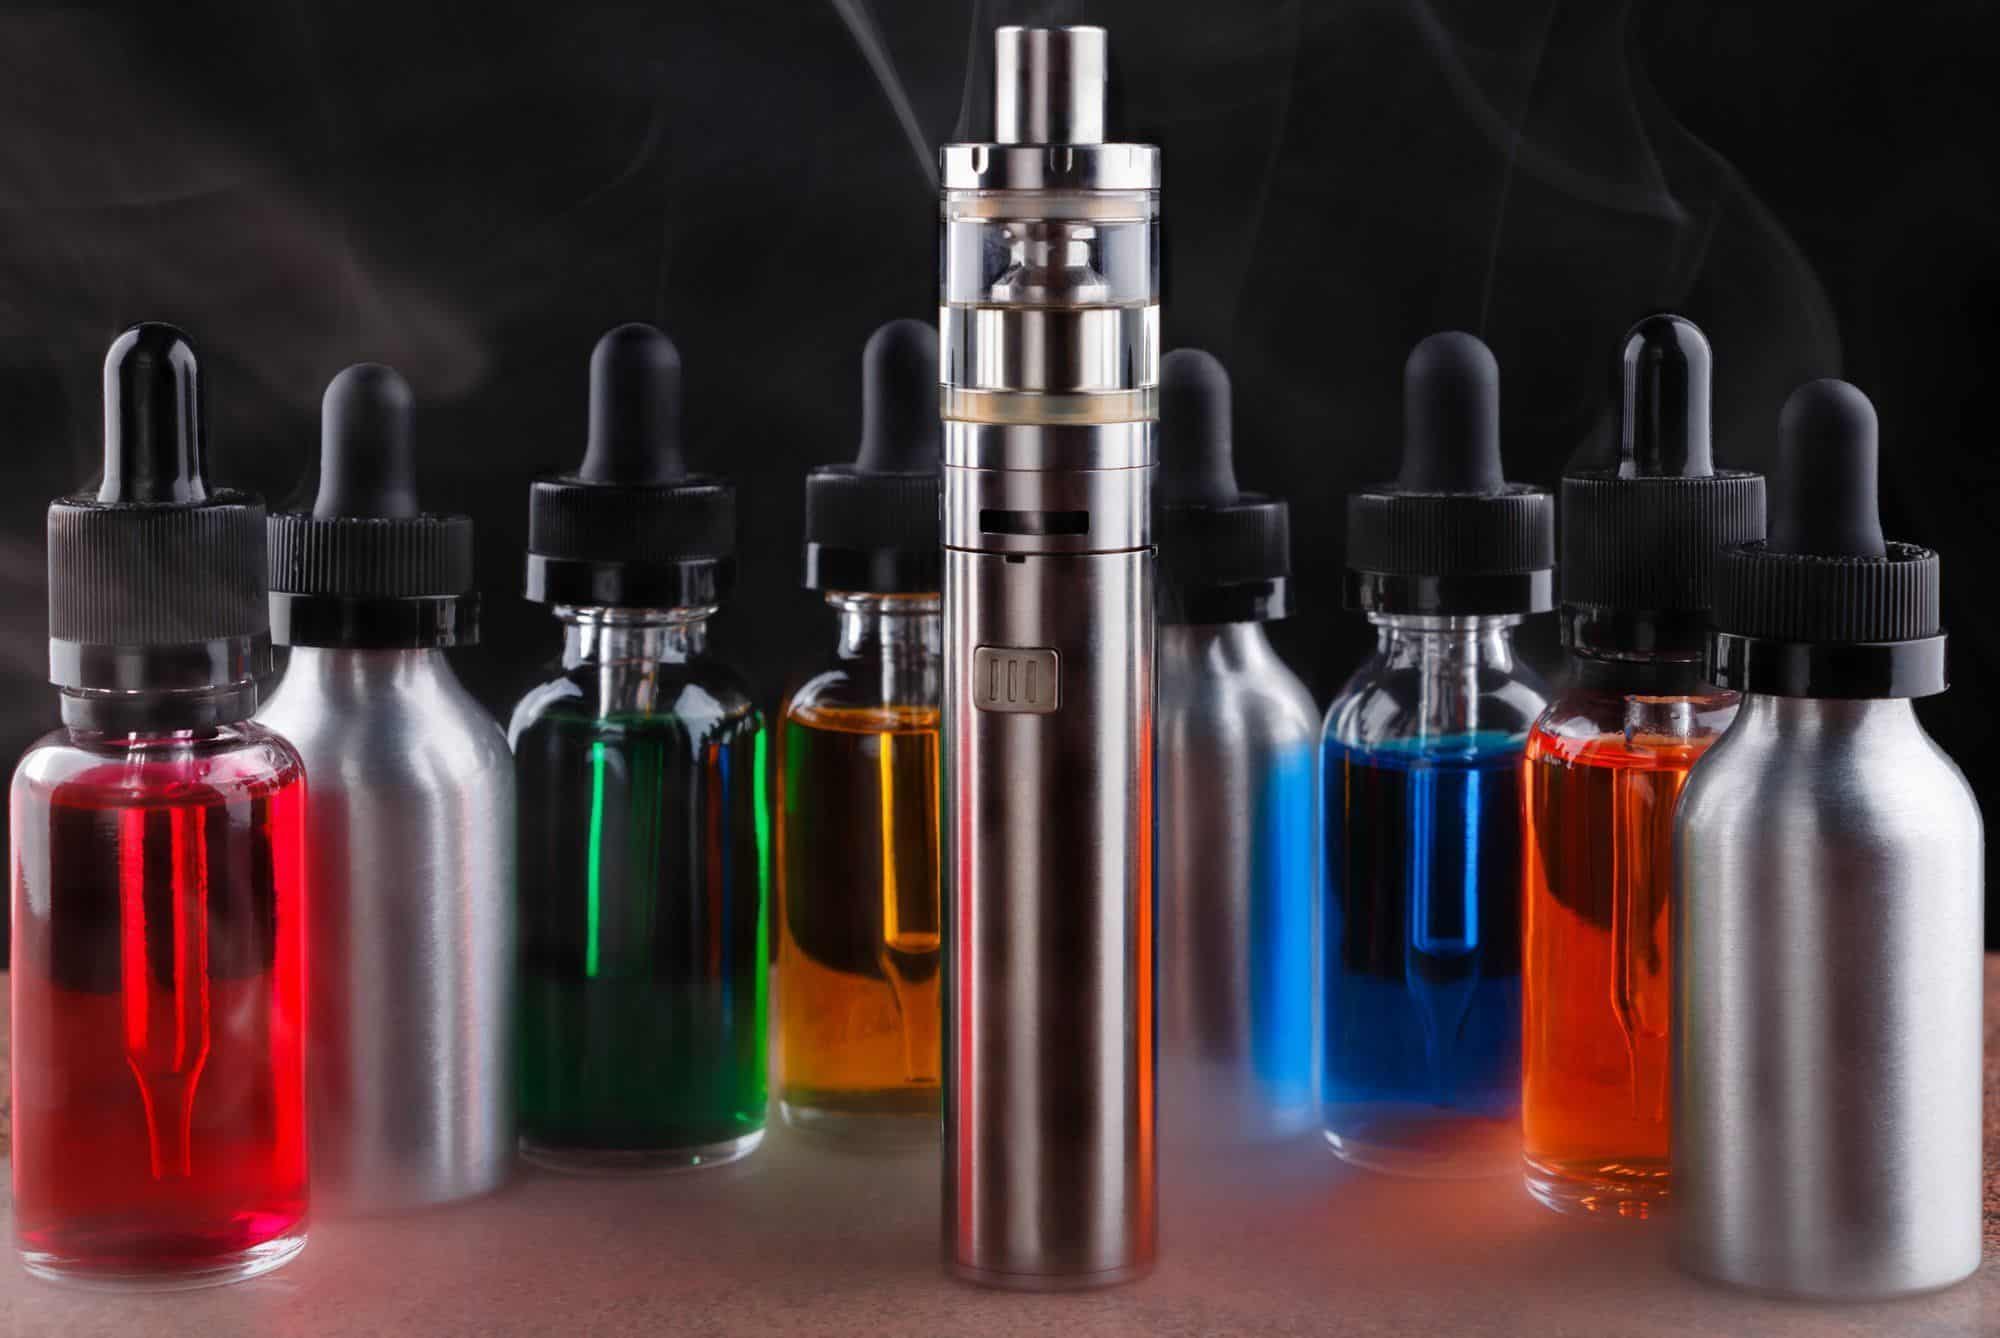 Top 7 Vapor Flavors You Don't Want to Miss